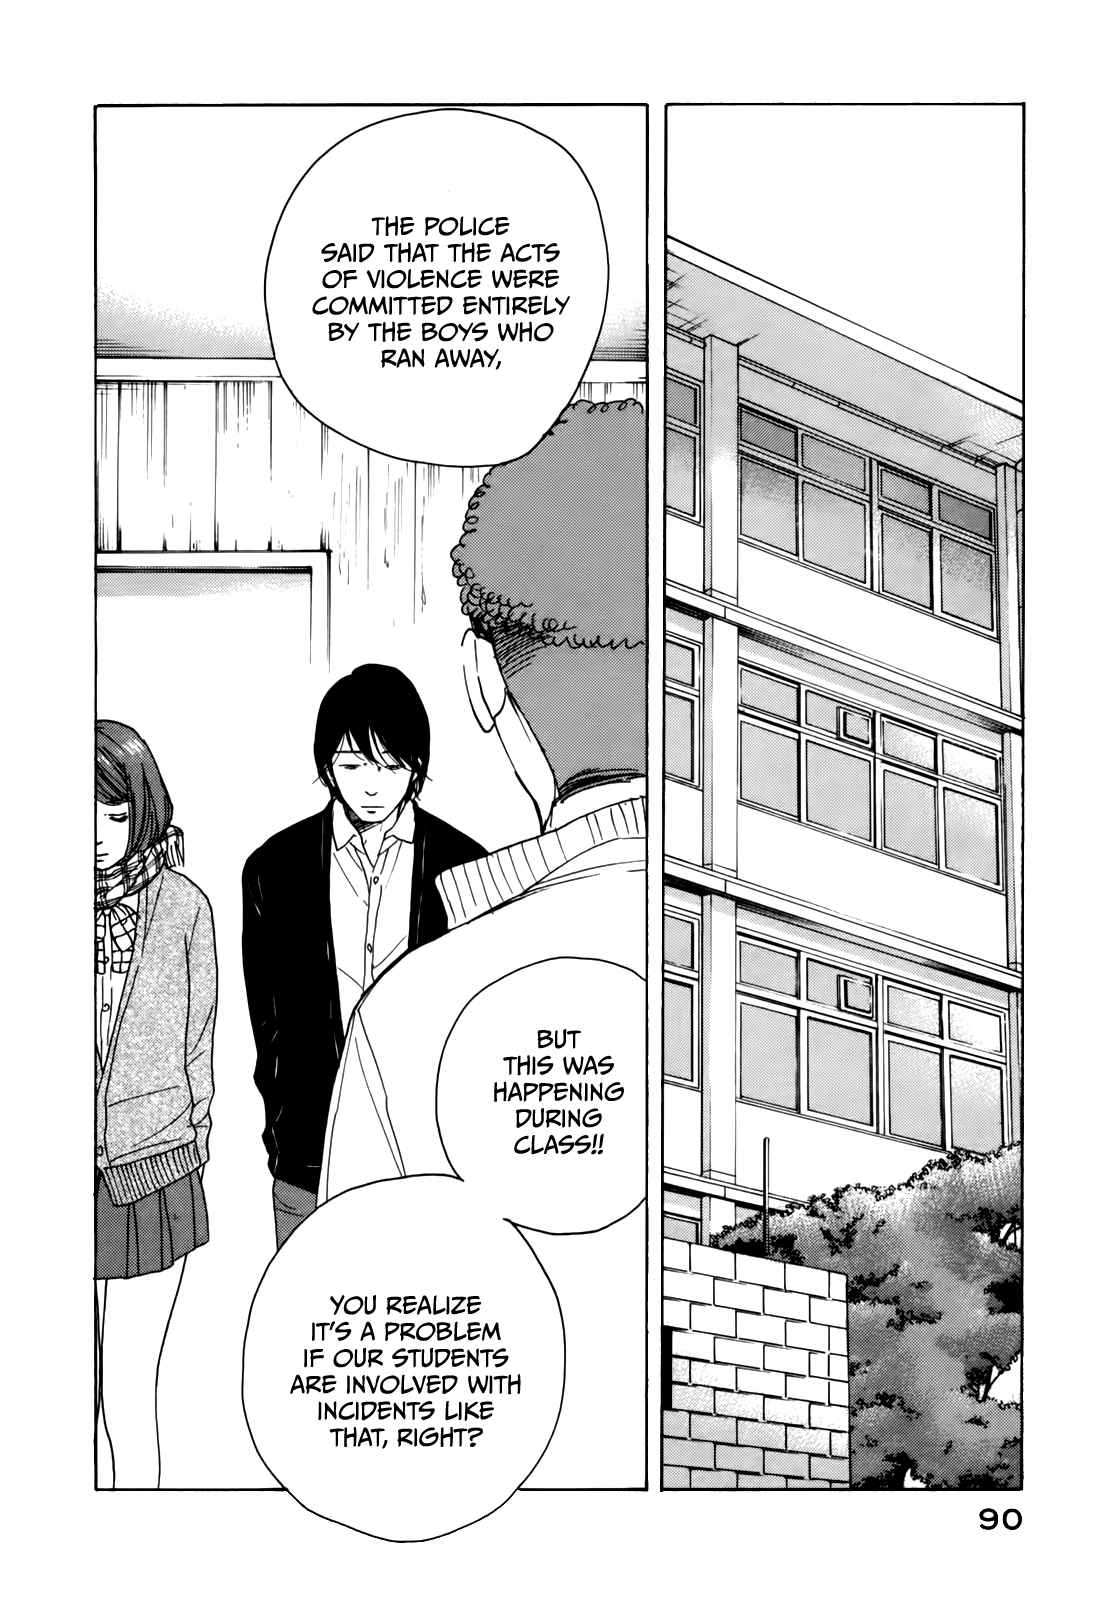 Sensei no Shiroi Uso Vol. 6 Ch. 34 Carrying the Anger That Won't Disappear Underfoot